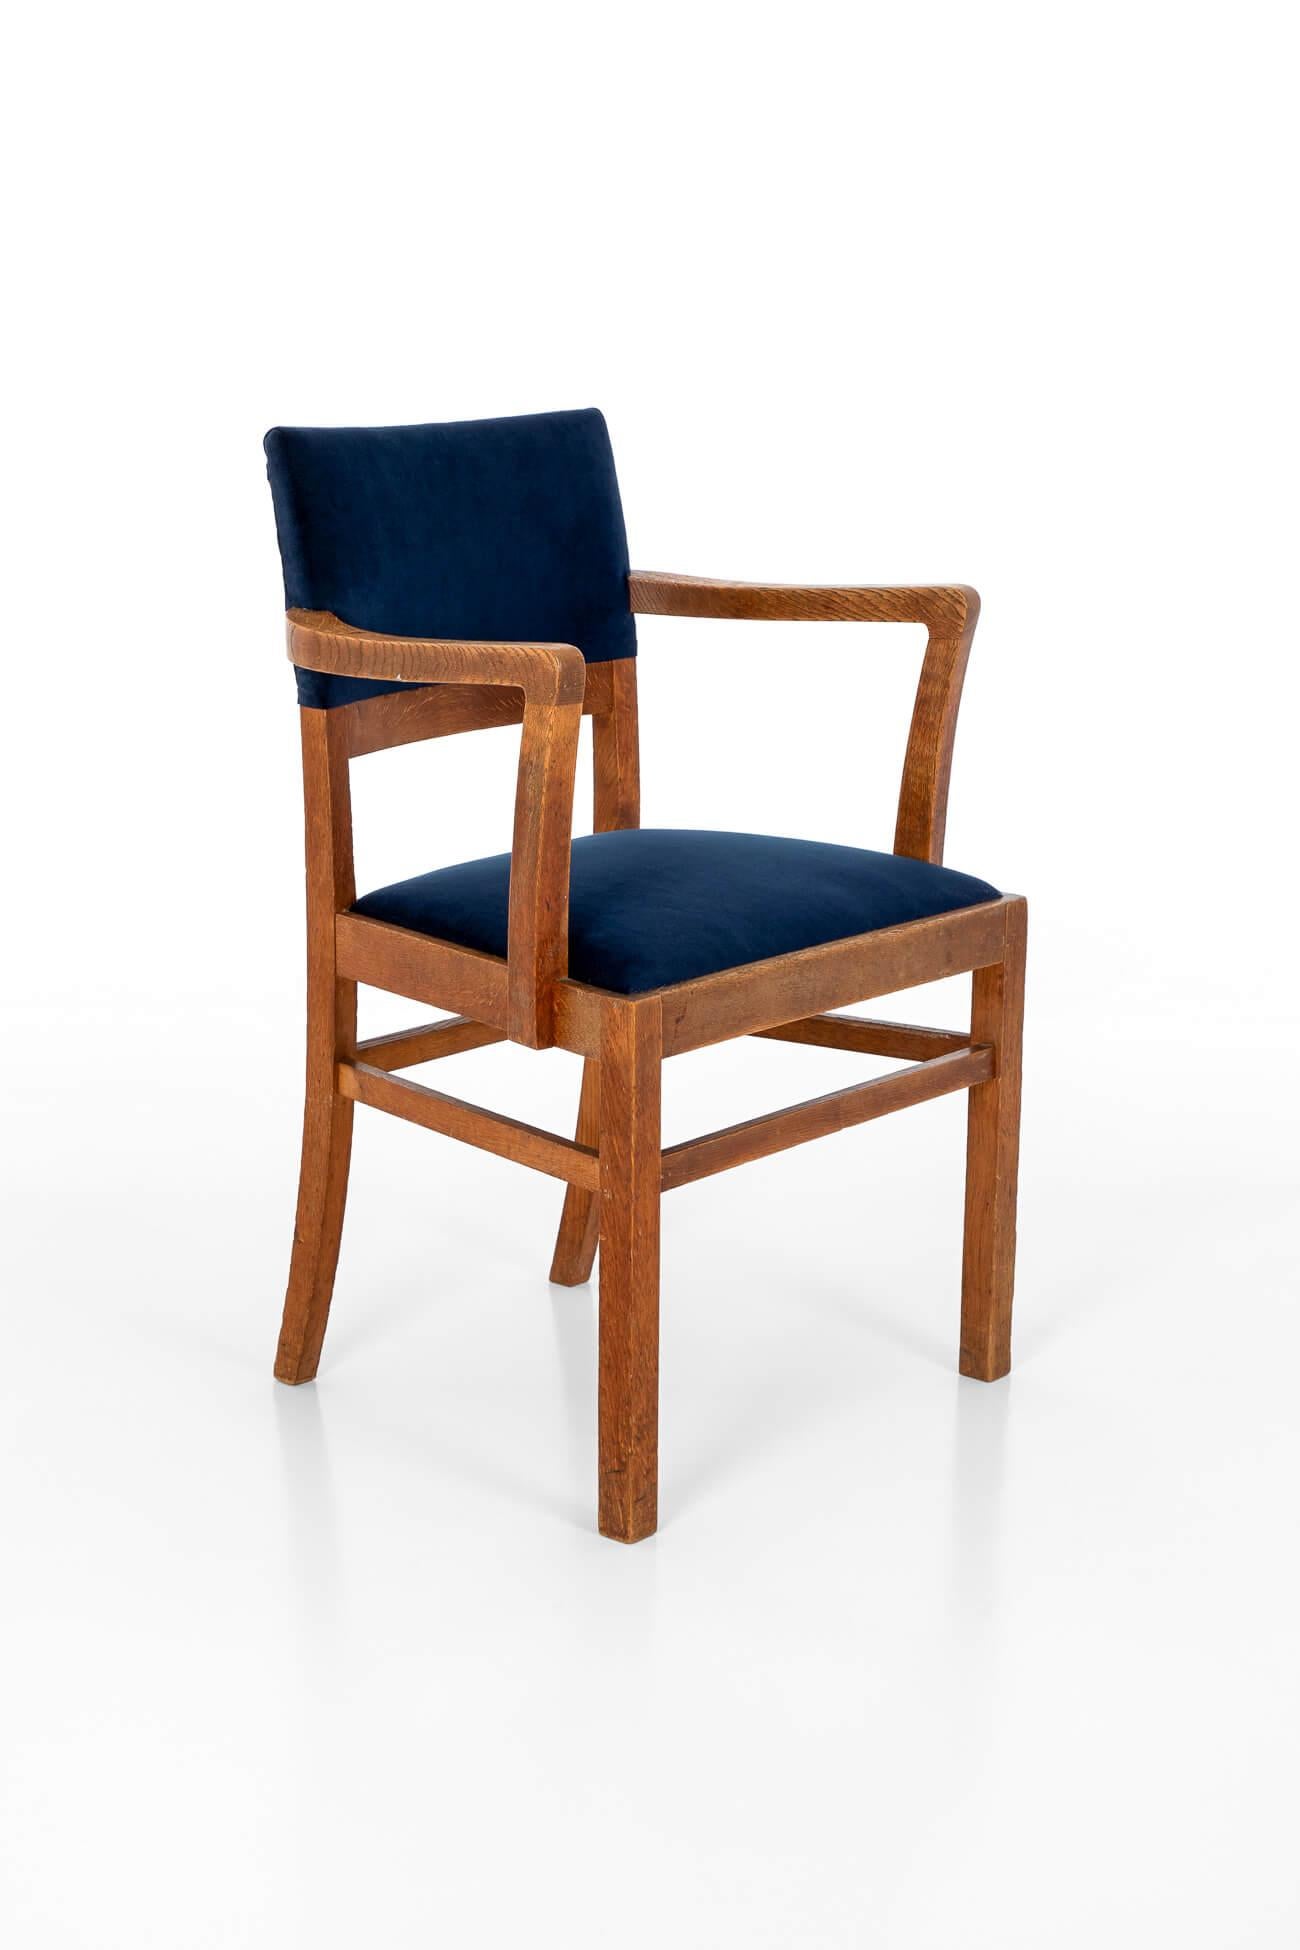 A superb Heal and Son Ltd Arts and Crafts side chair in oak.

High back with curved arms over a generous and comfortable seat cushion. United by peripheral stretchers on both straight saber legs.

The back rest cushion and seat have been